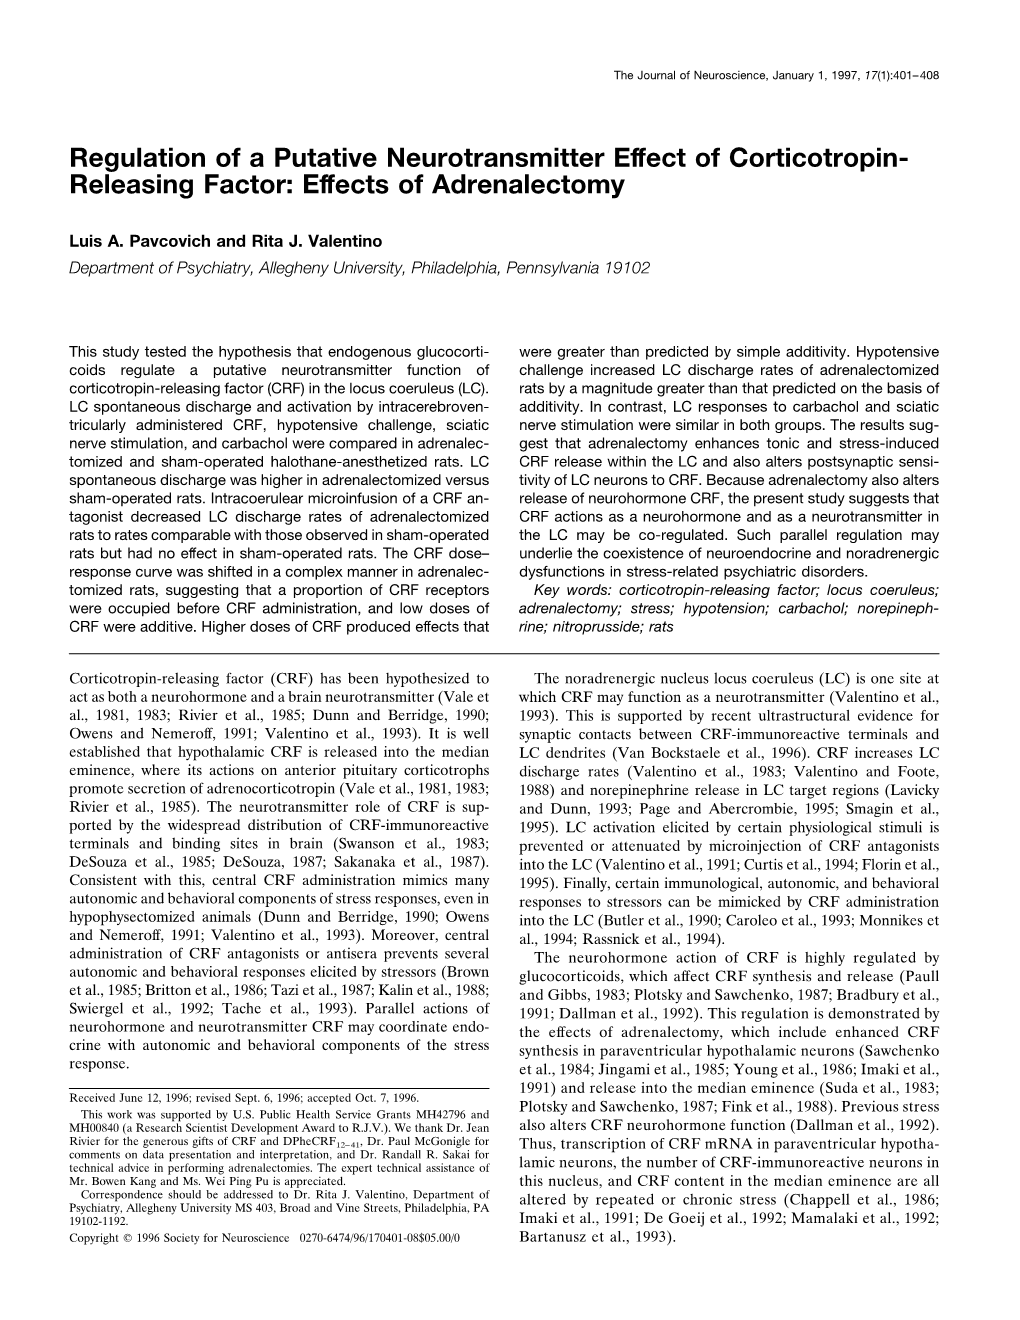 Regulation of a Putative Neurotransmitter Effect of Corticotropin- Releasing Factor: Effects of Adrenalectomy